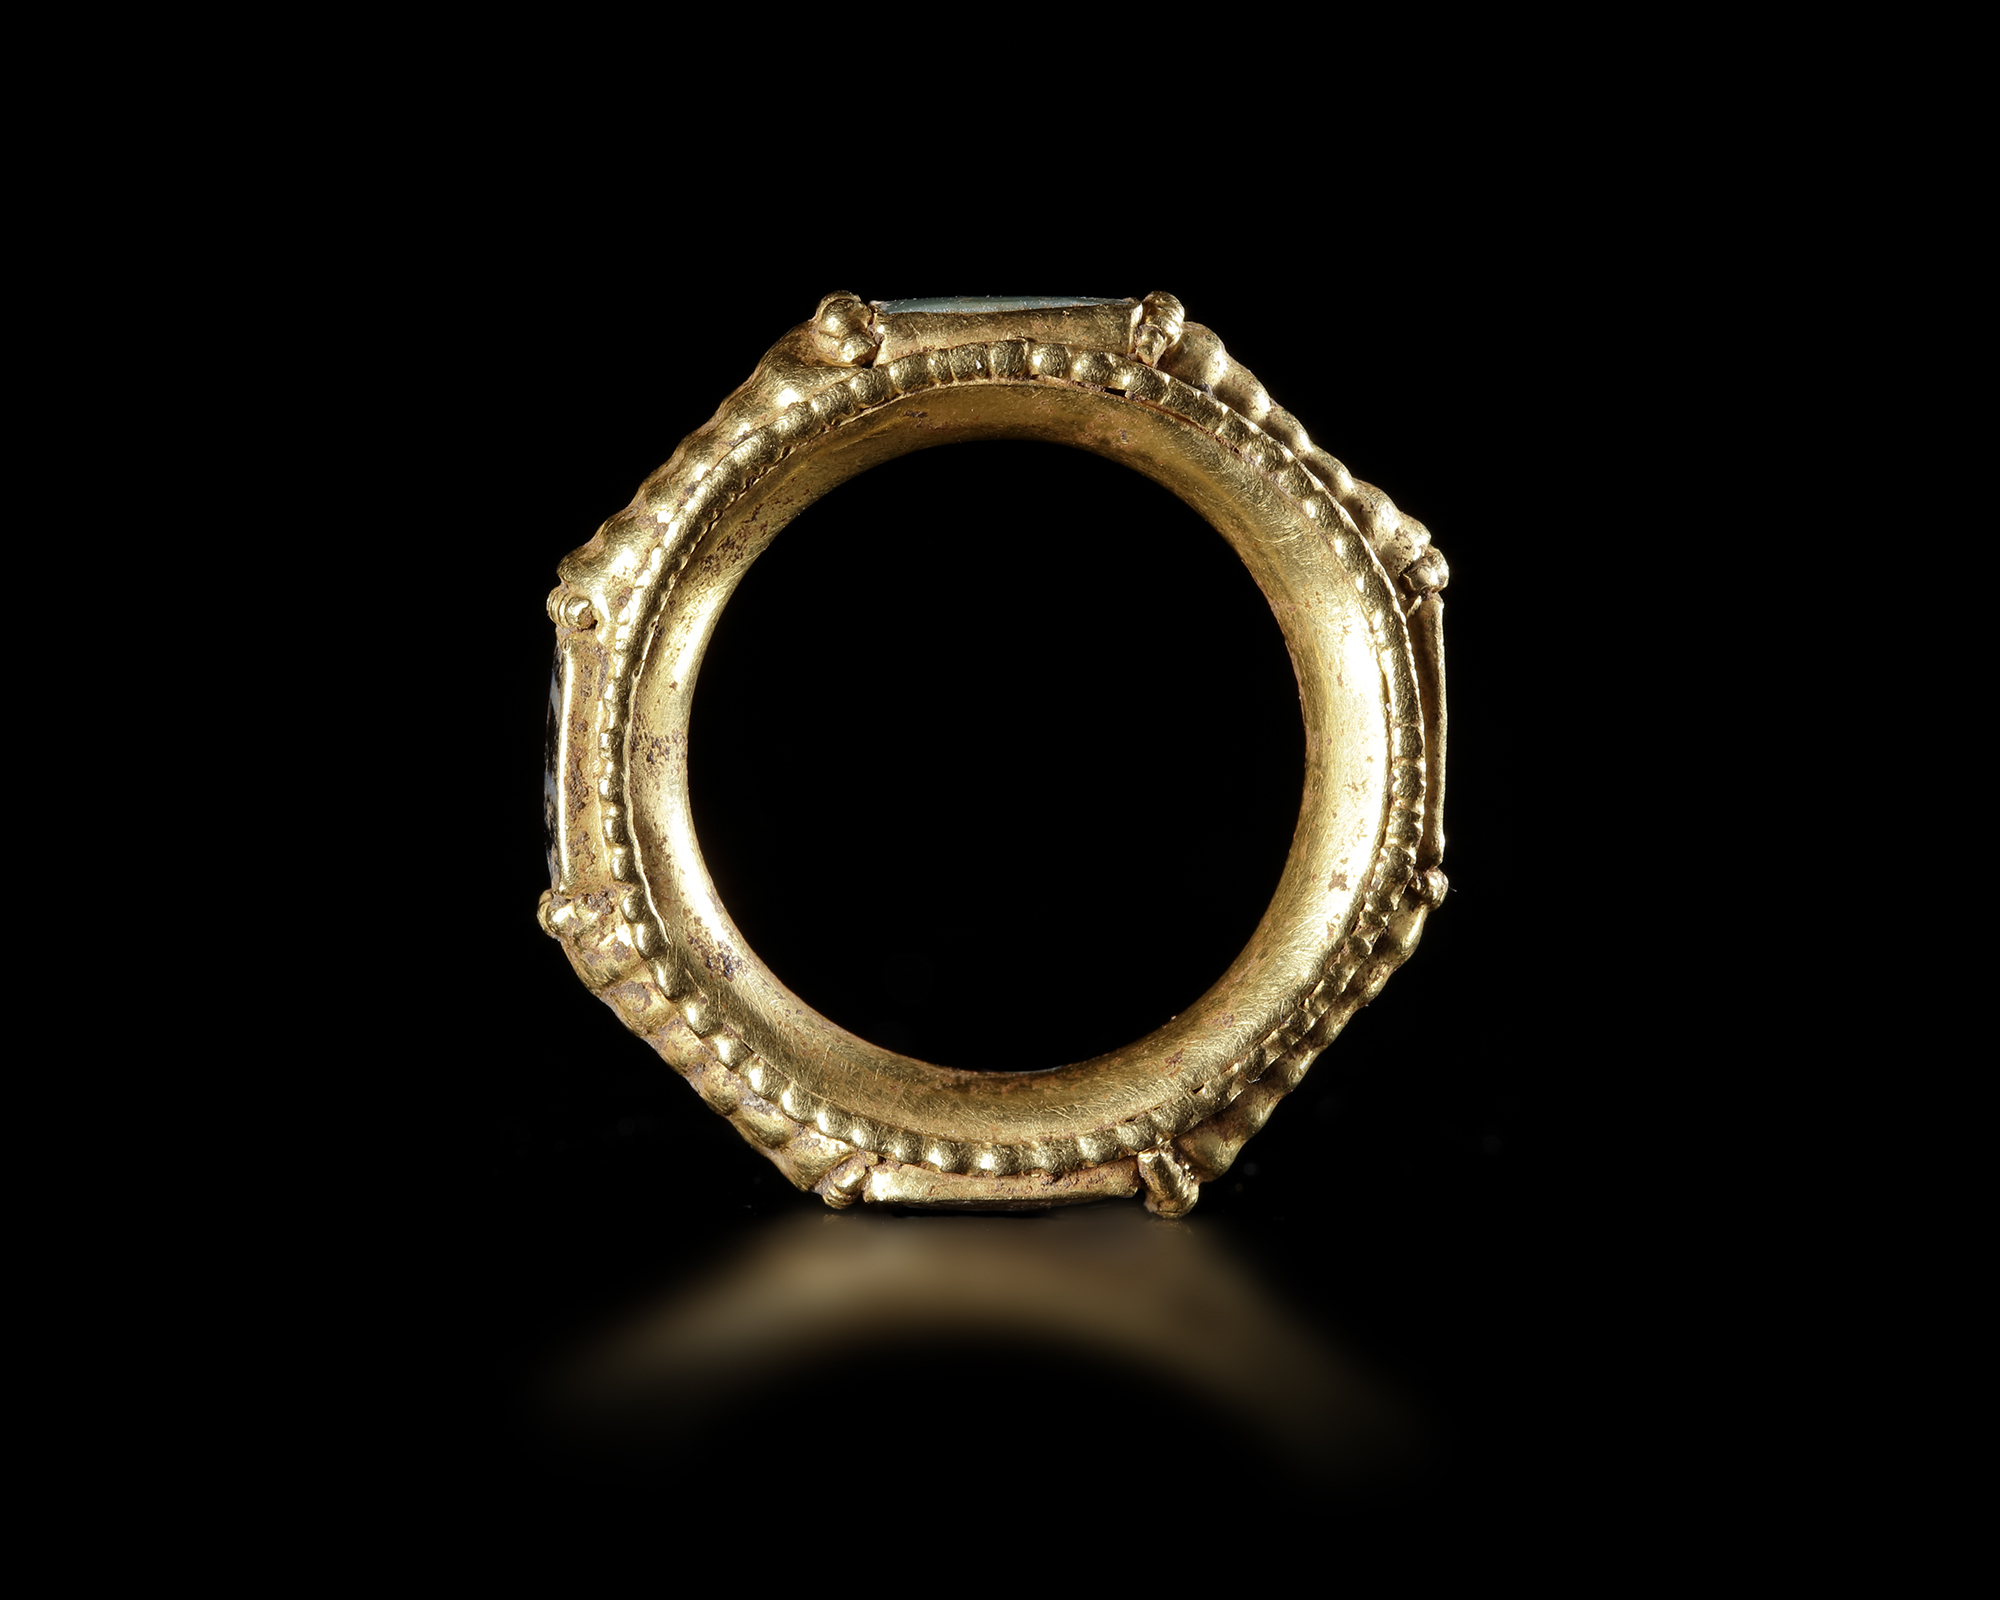 A LATE ROMAN GOLD RING WITH INLAYS, 3RD-4TH CENTURY AD - Bild 5 aus 5